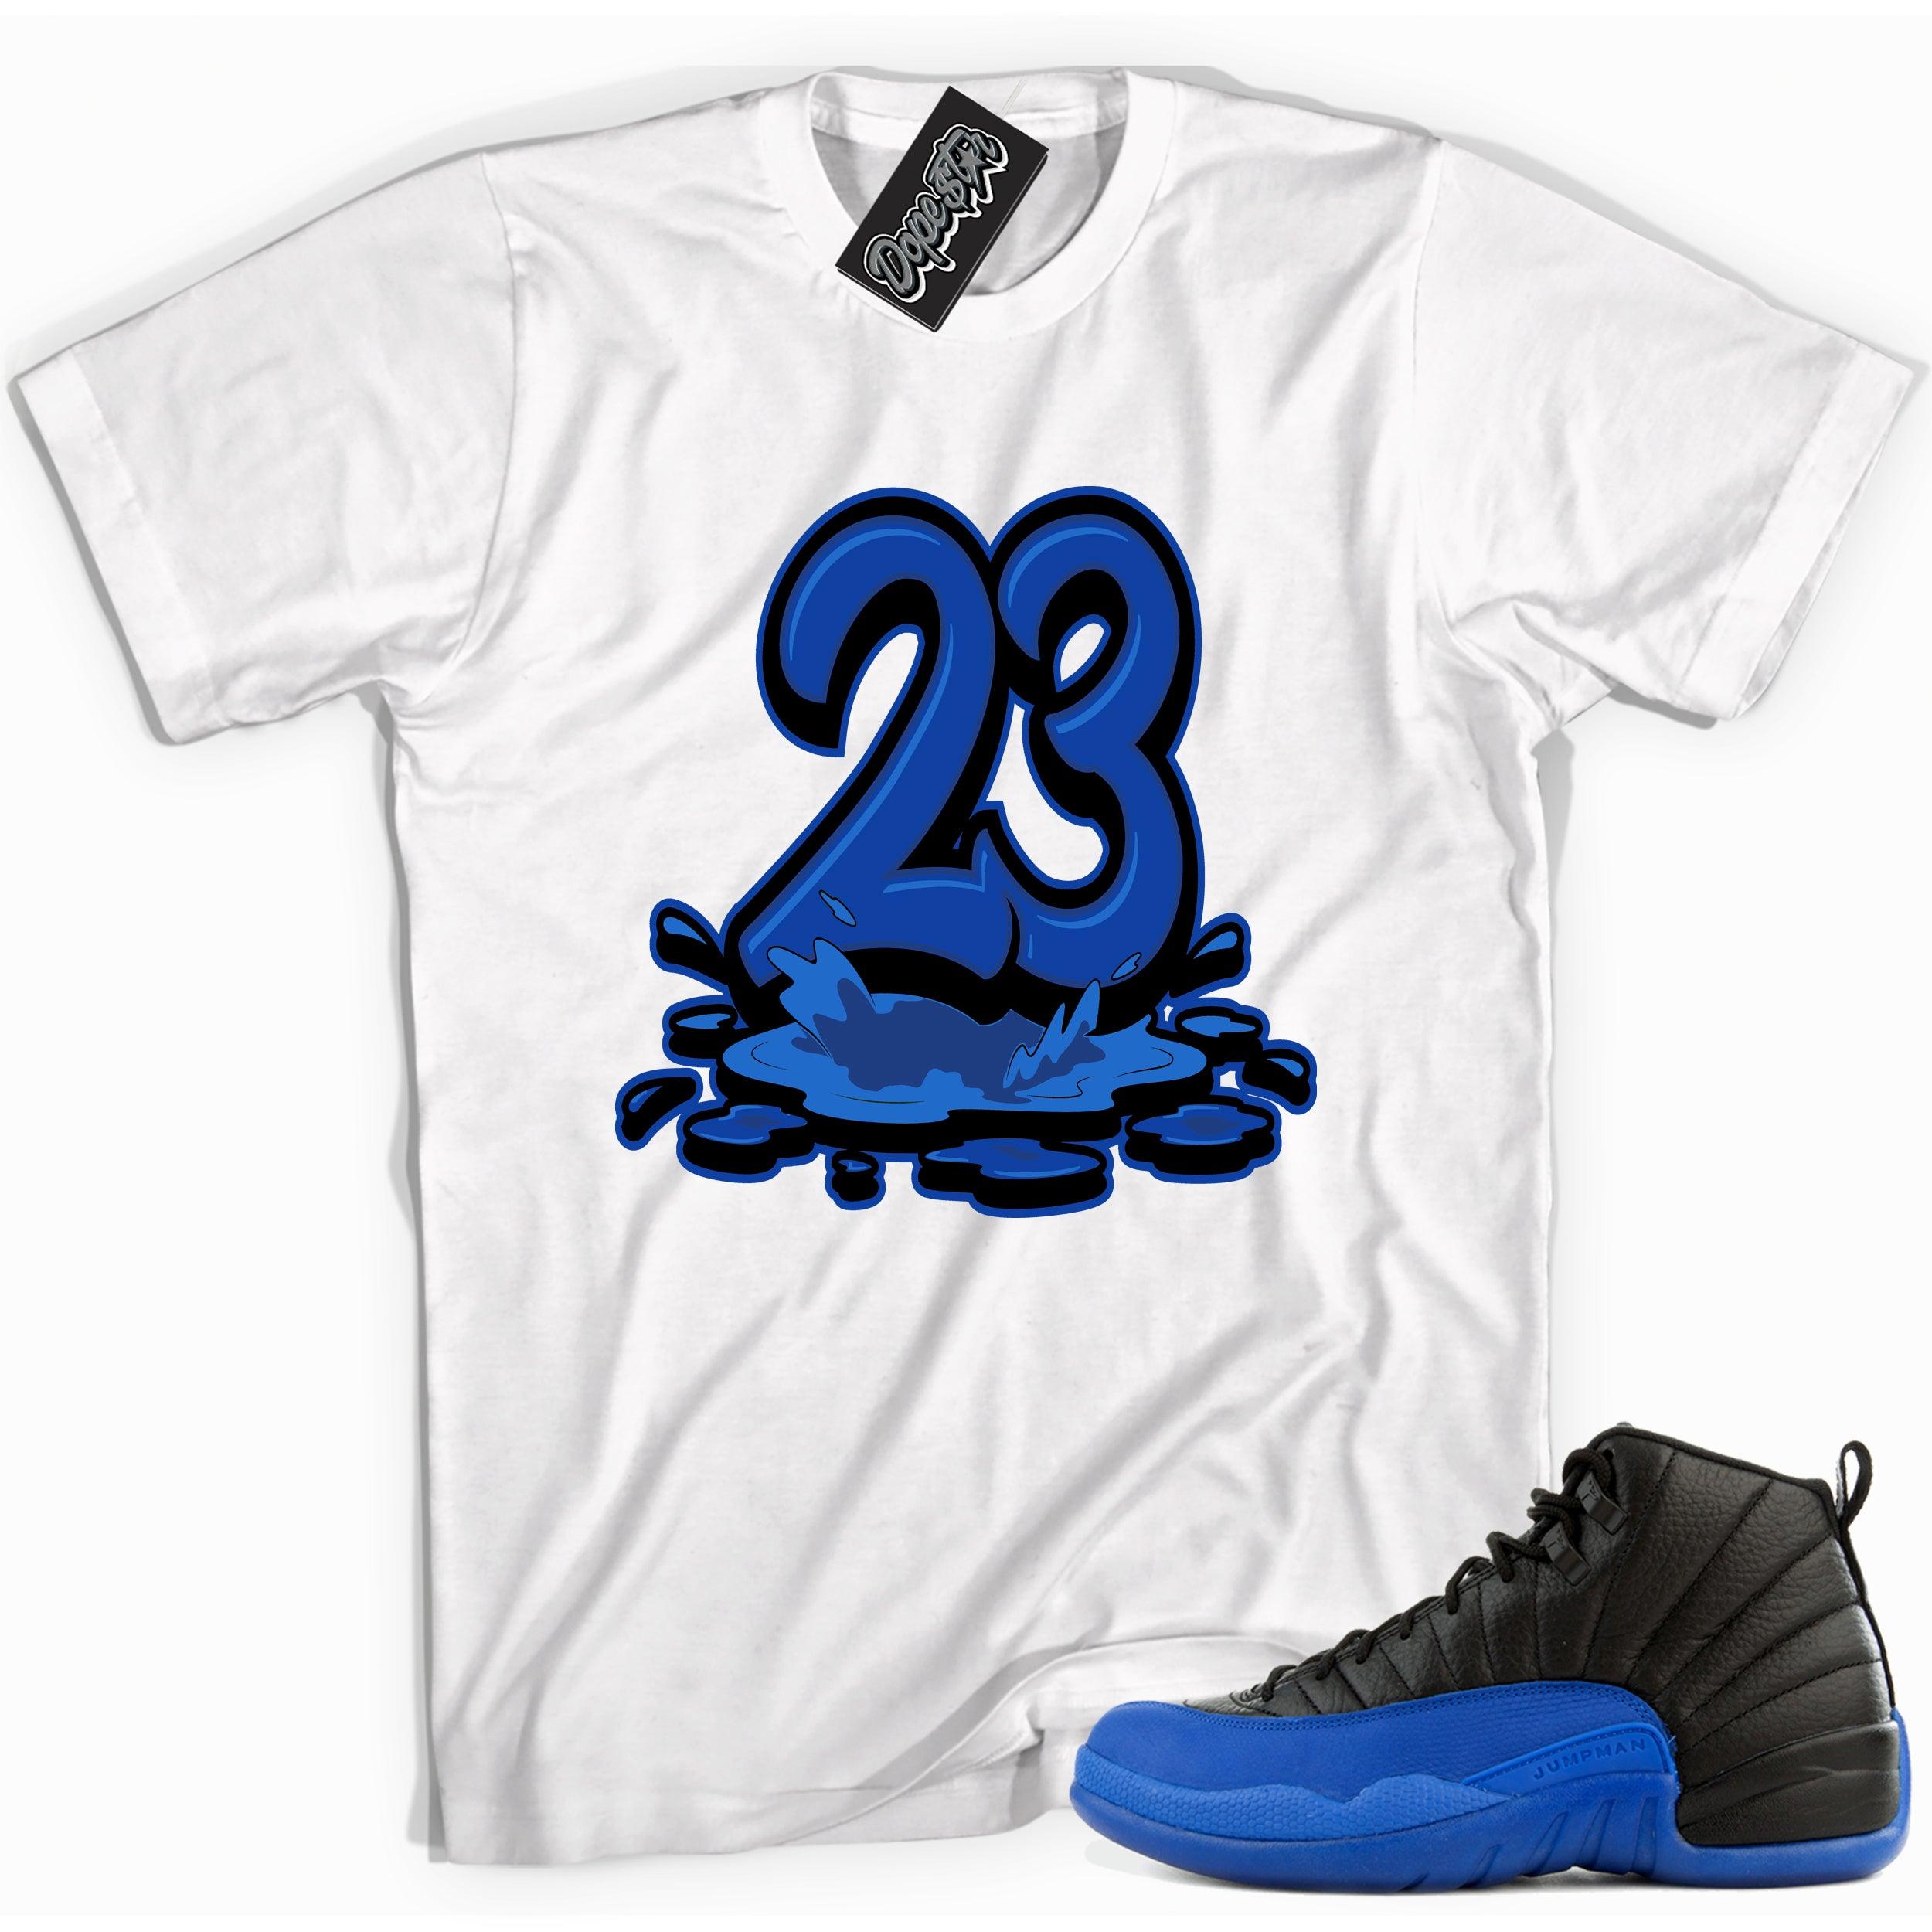 Cool white graphic tee with 'melting 23' print, that perfectly matches Air Jordan 12 Retro Black Game Royal sneakers.